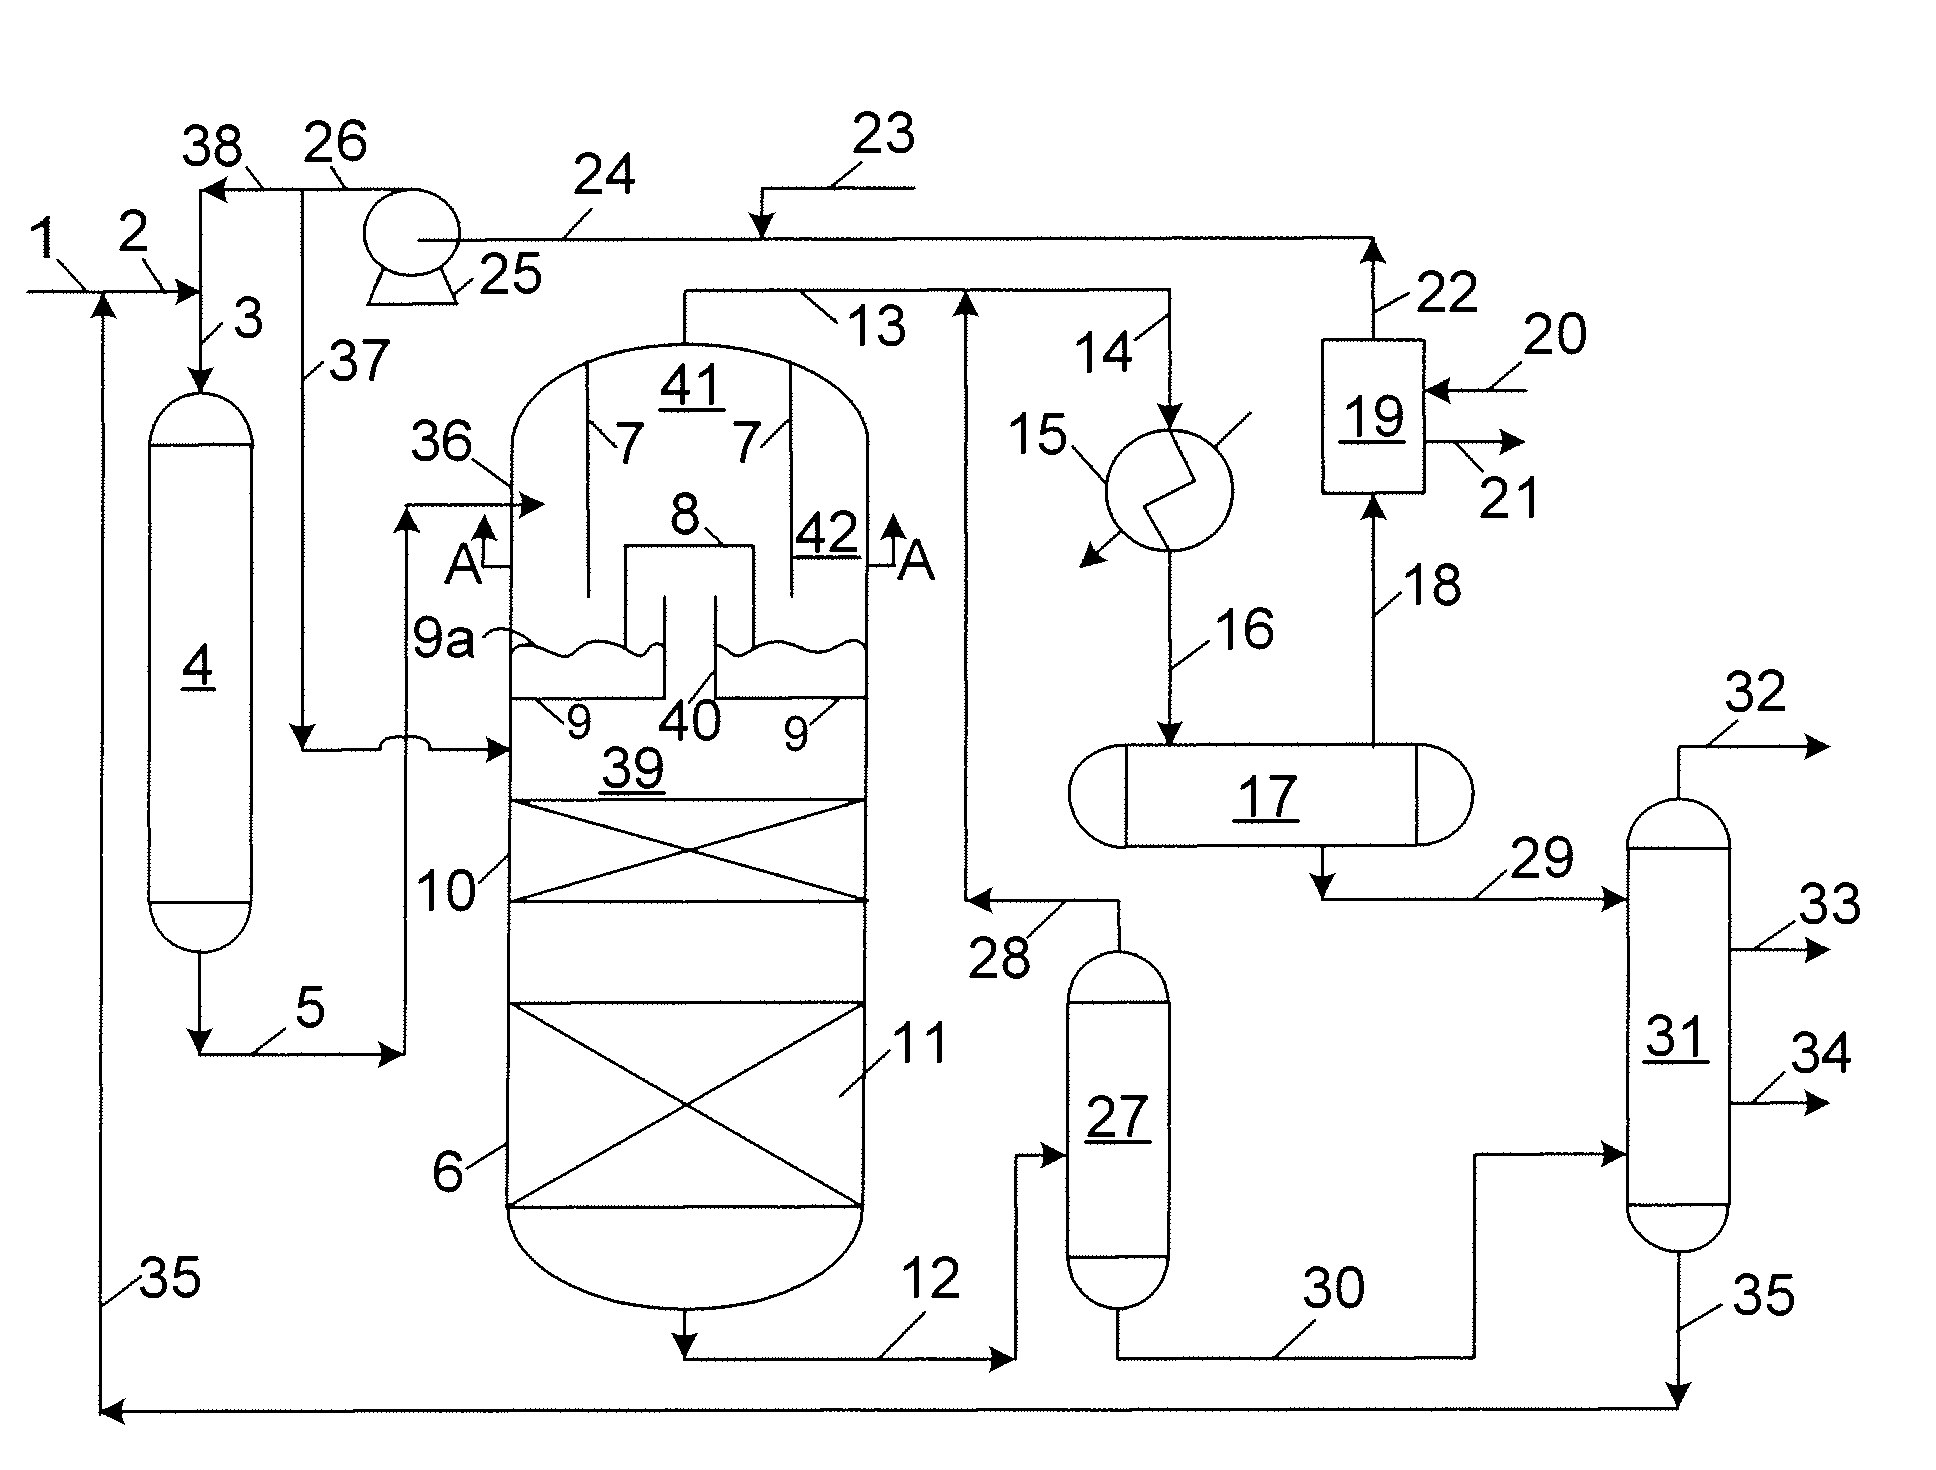 Apparatus for hydrocracking a hydrocarbon feedstock